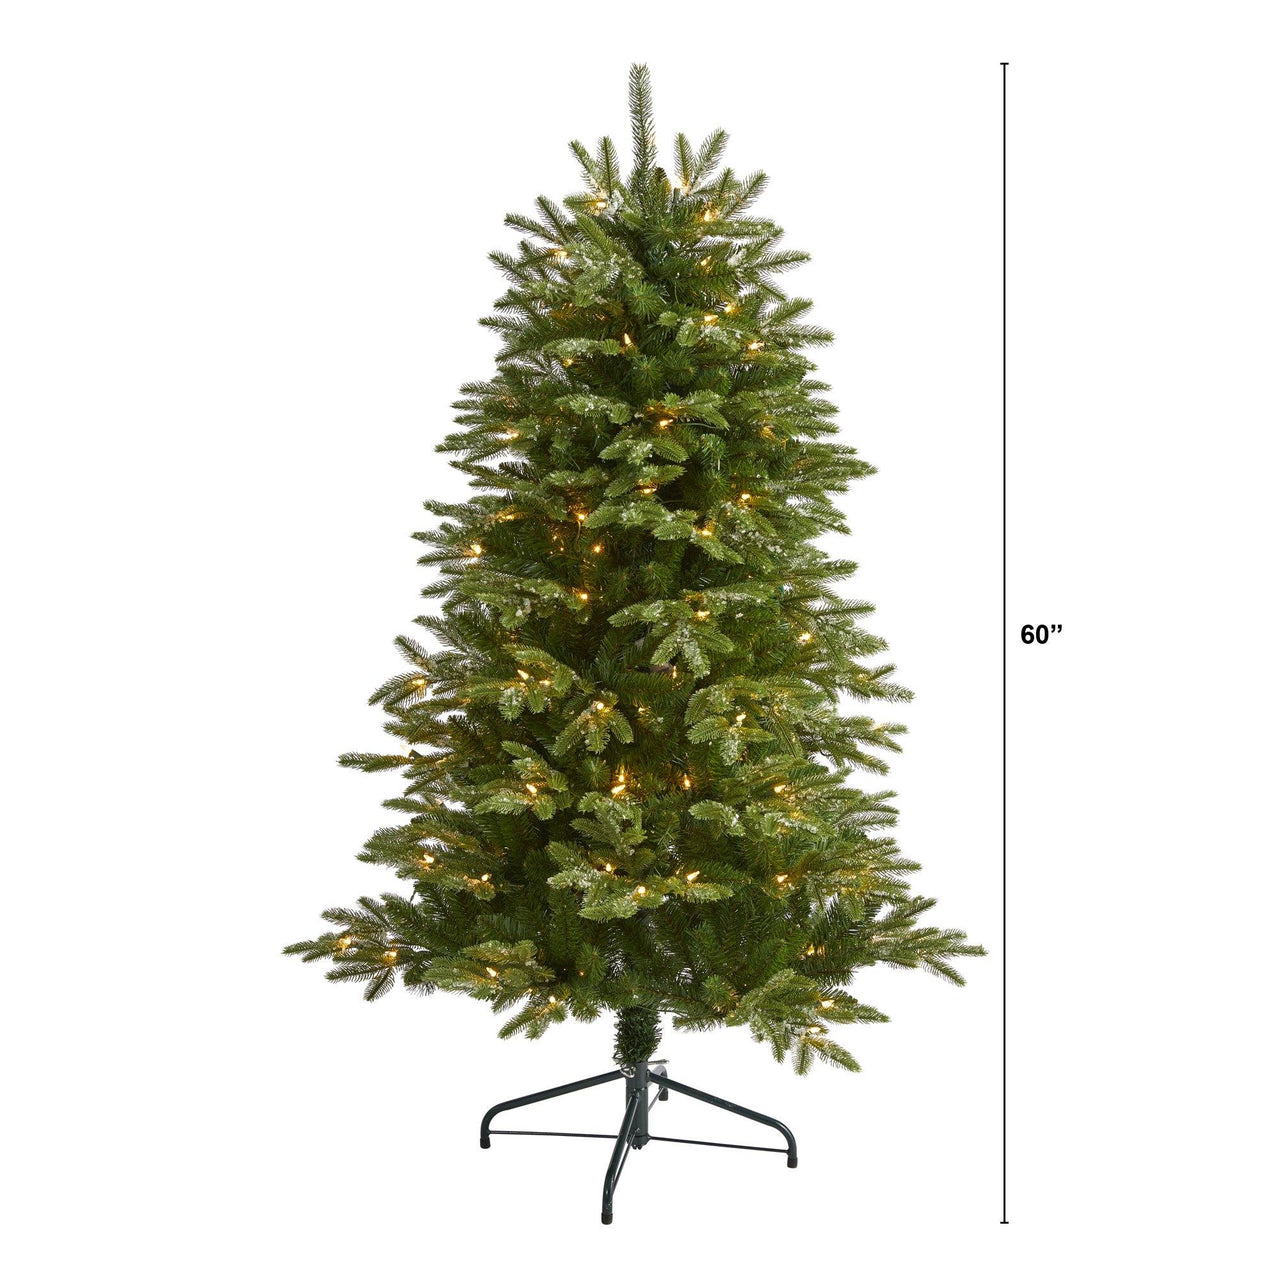 5’ Snowed Grand Teton Artificial Christmas Tree with 150 Clear Lights and 462 Bendable Branches - The Fox Decor